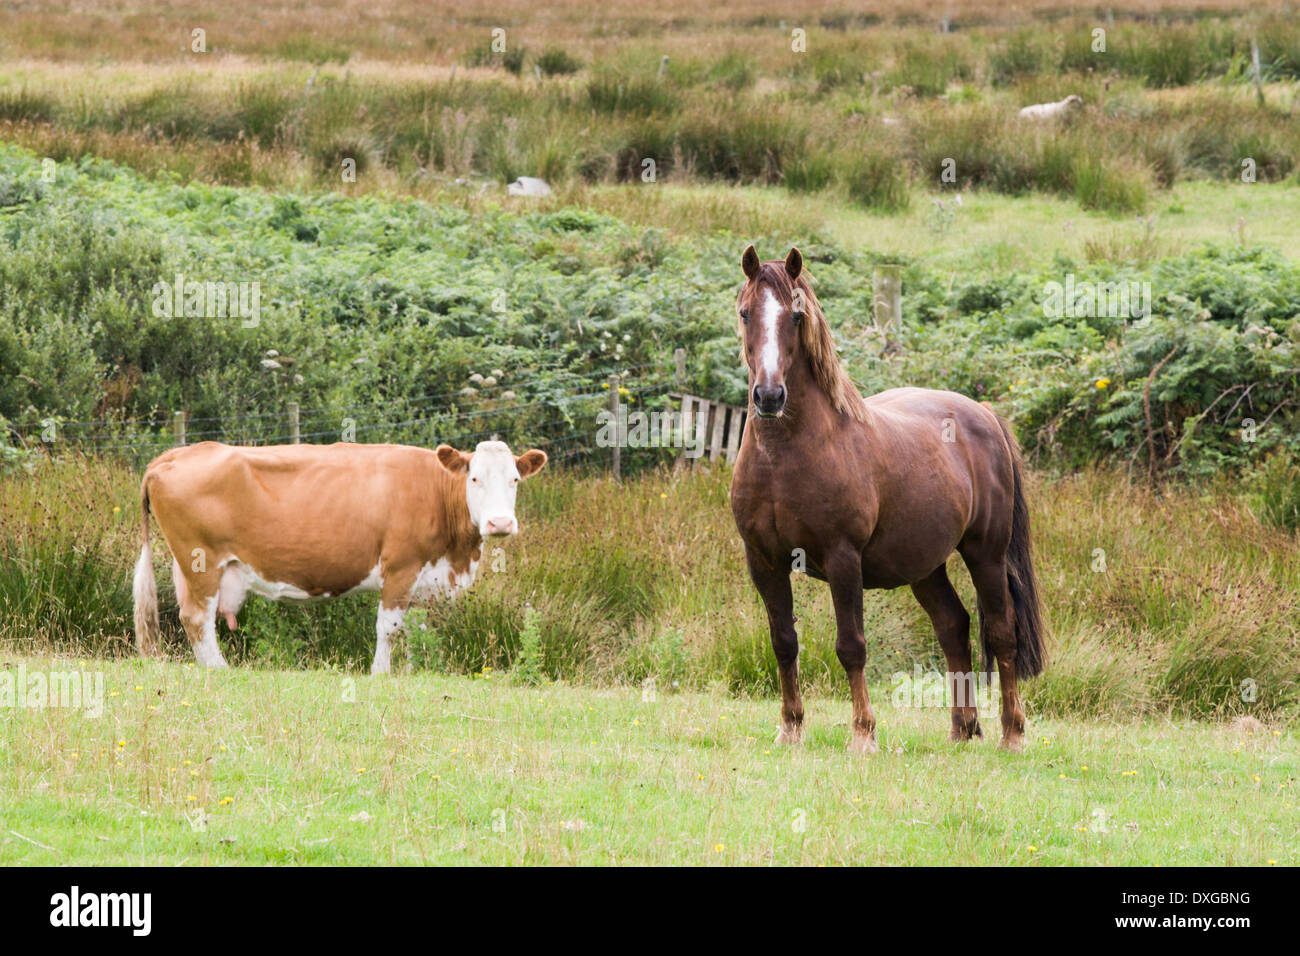 Horse and cow in a field, Isle of Islay, Inner Hebrides, Scotland Stock Photo